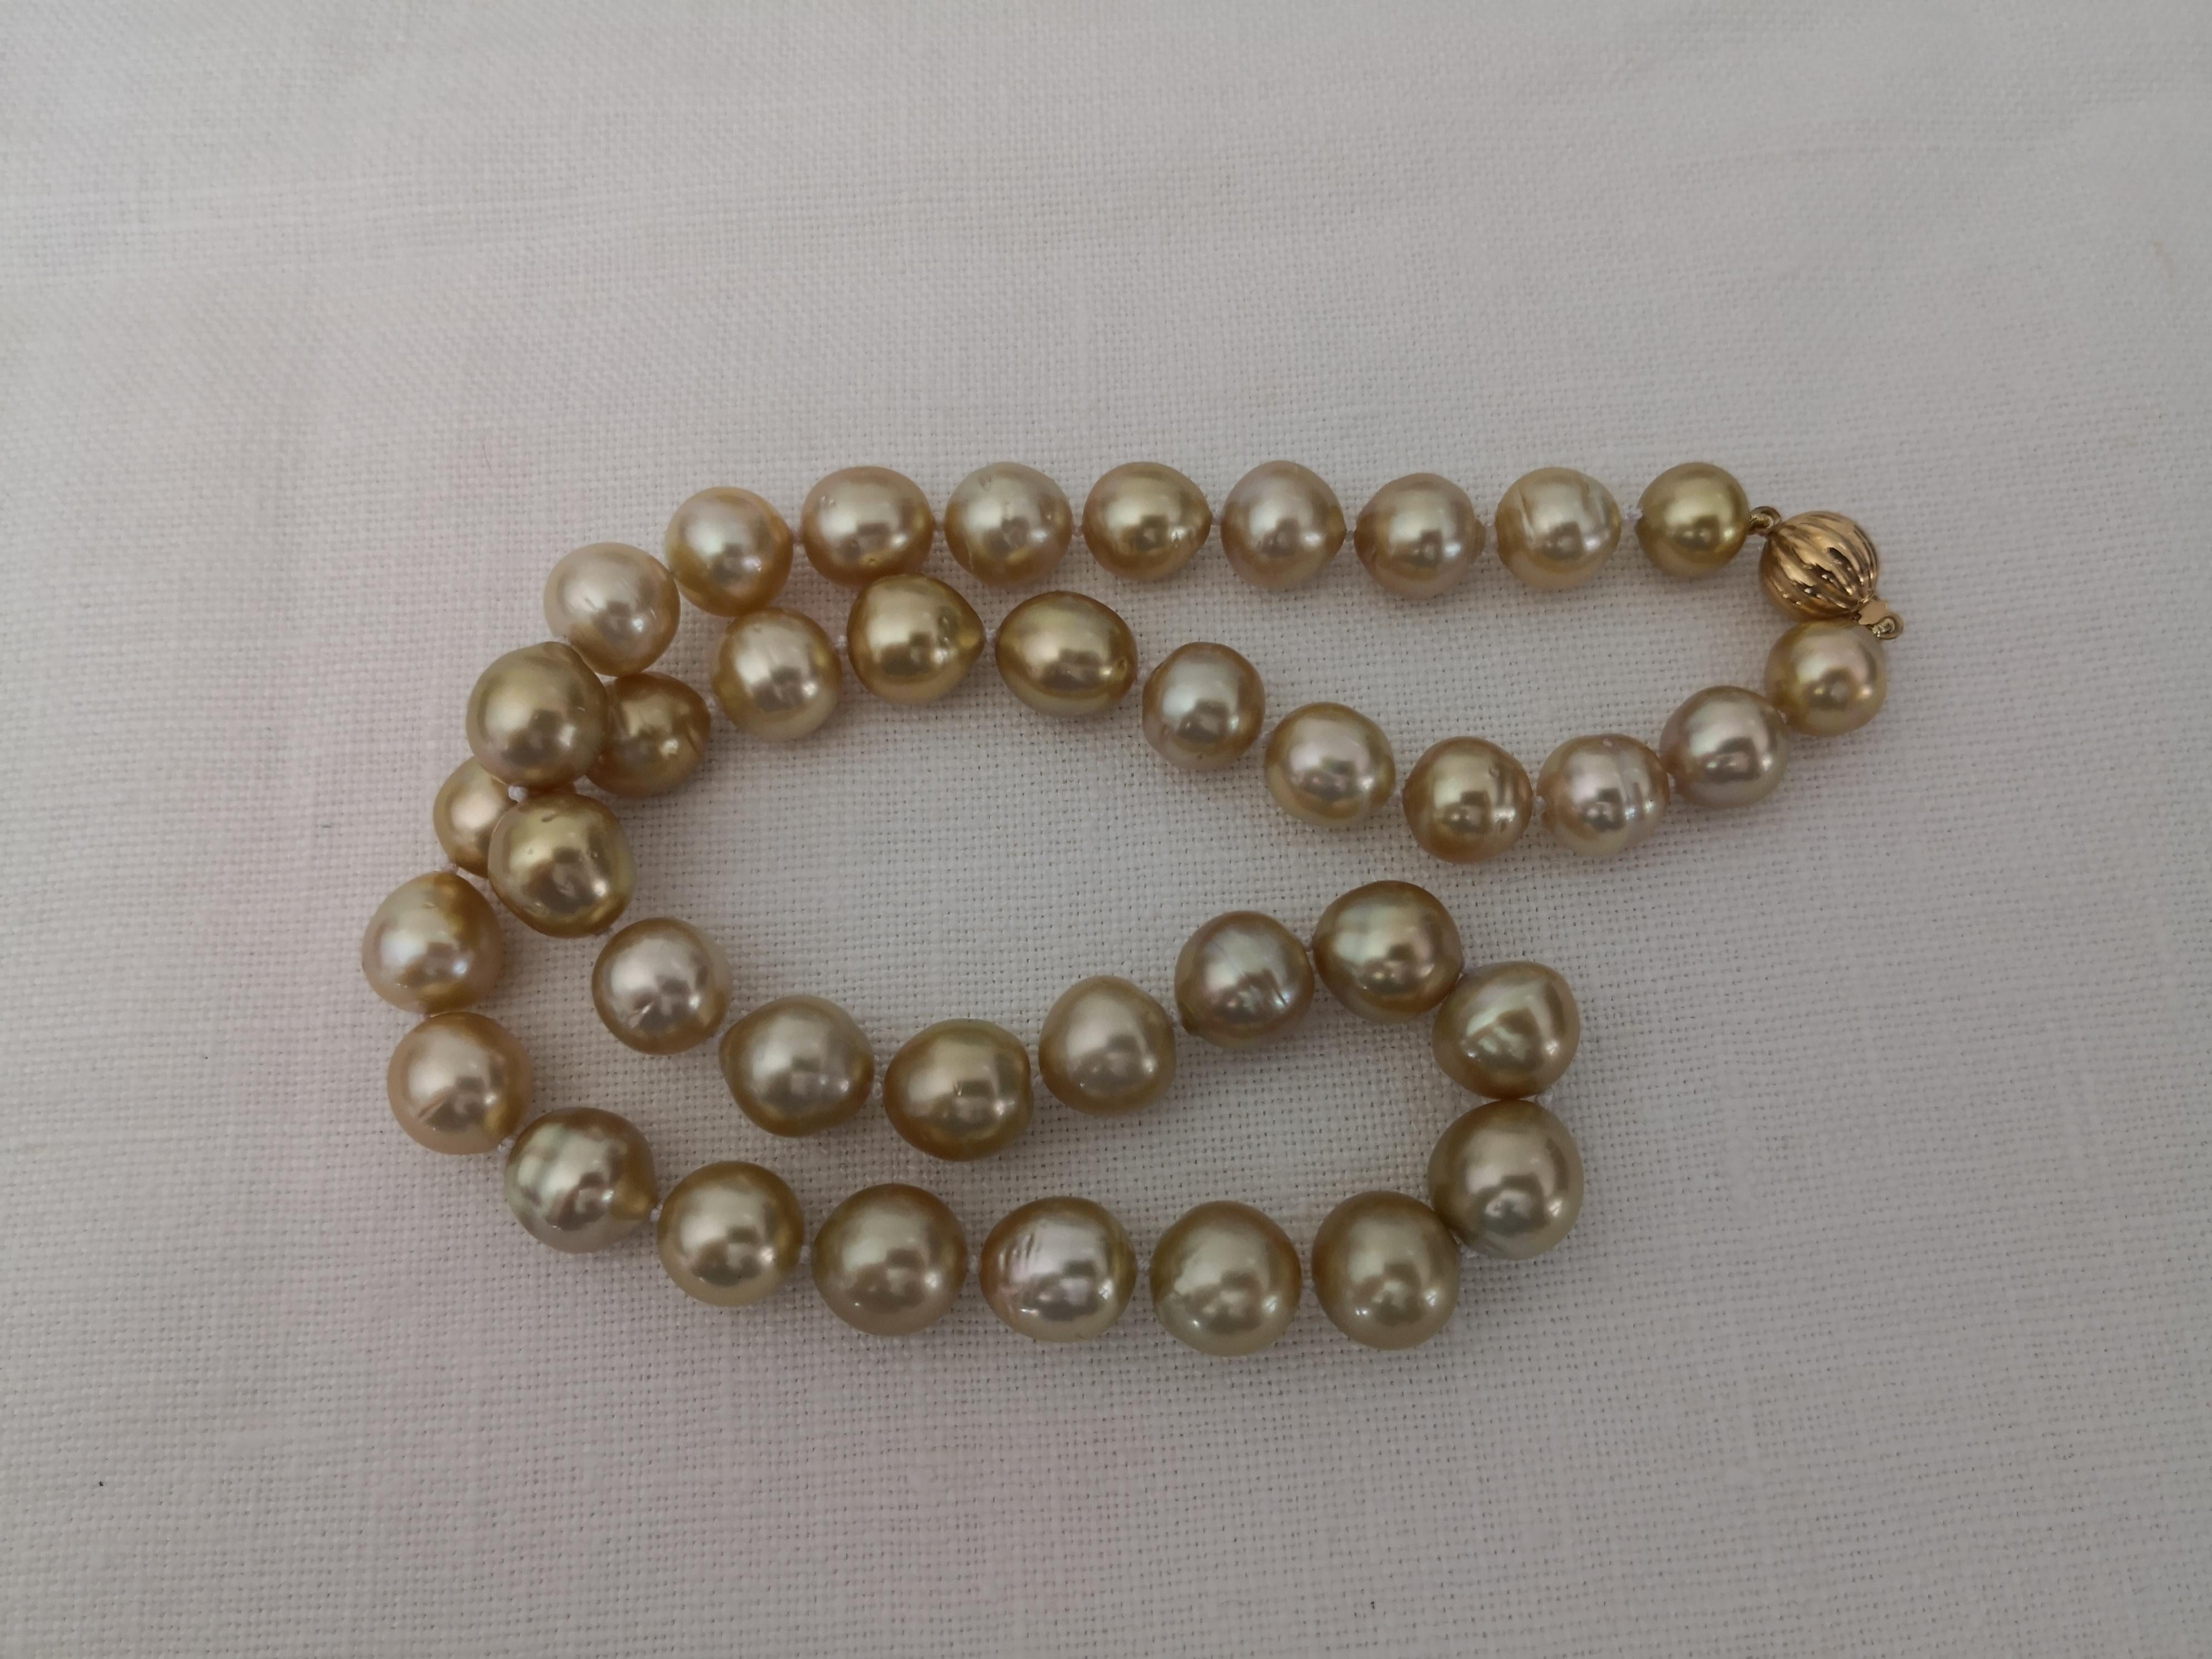 A Gorgeous Natural Color Deep Golden South Sea Pearls Necklace

- 38 pearls in the necklace

- Size of Pearls from 10 to 12 mm 

- Natural Deep Golden Color

- Natural High Luster

- Pearl of oval and drop shapes

- 45 cm long necklace